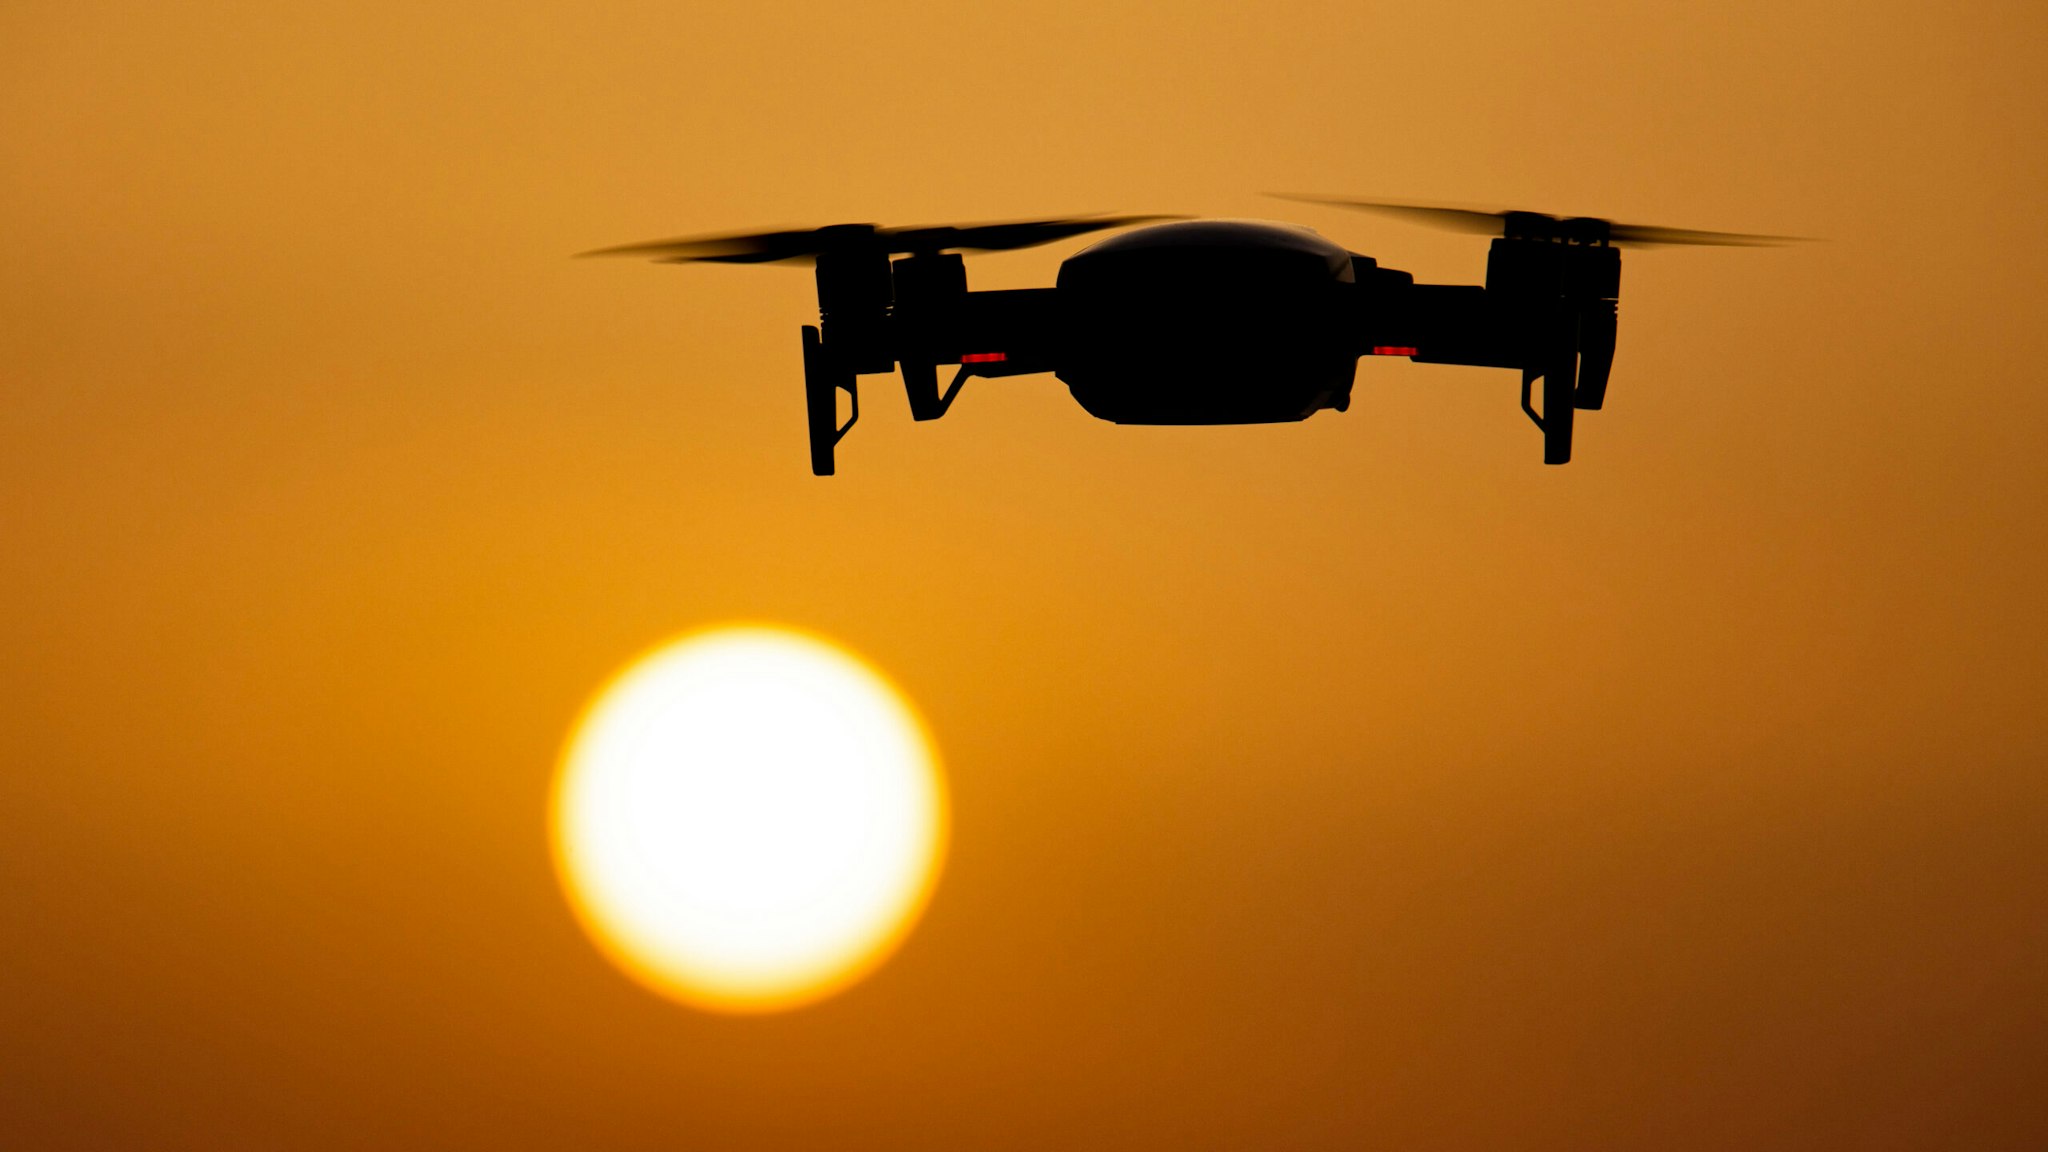 A quadcopter drone hovering during a flight in front of the sun. The flying drone is seen as a dark silhouette against the spectacular colorful sunset sky and the sun while the UAV is able to capture aerial videography and photography via a remote control. The specific drone is a DJI Mavic Air. The Unmanned aerial vehicle is popular for recreational usage by tourists as the technology is accessible to everybody in low cost but also has many professional applications Sani Beach area, Halkidiki, Greece on July 15, 2021